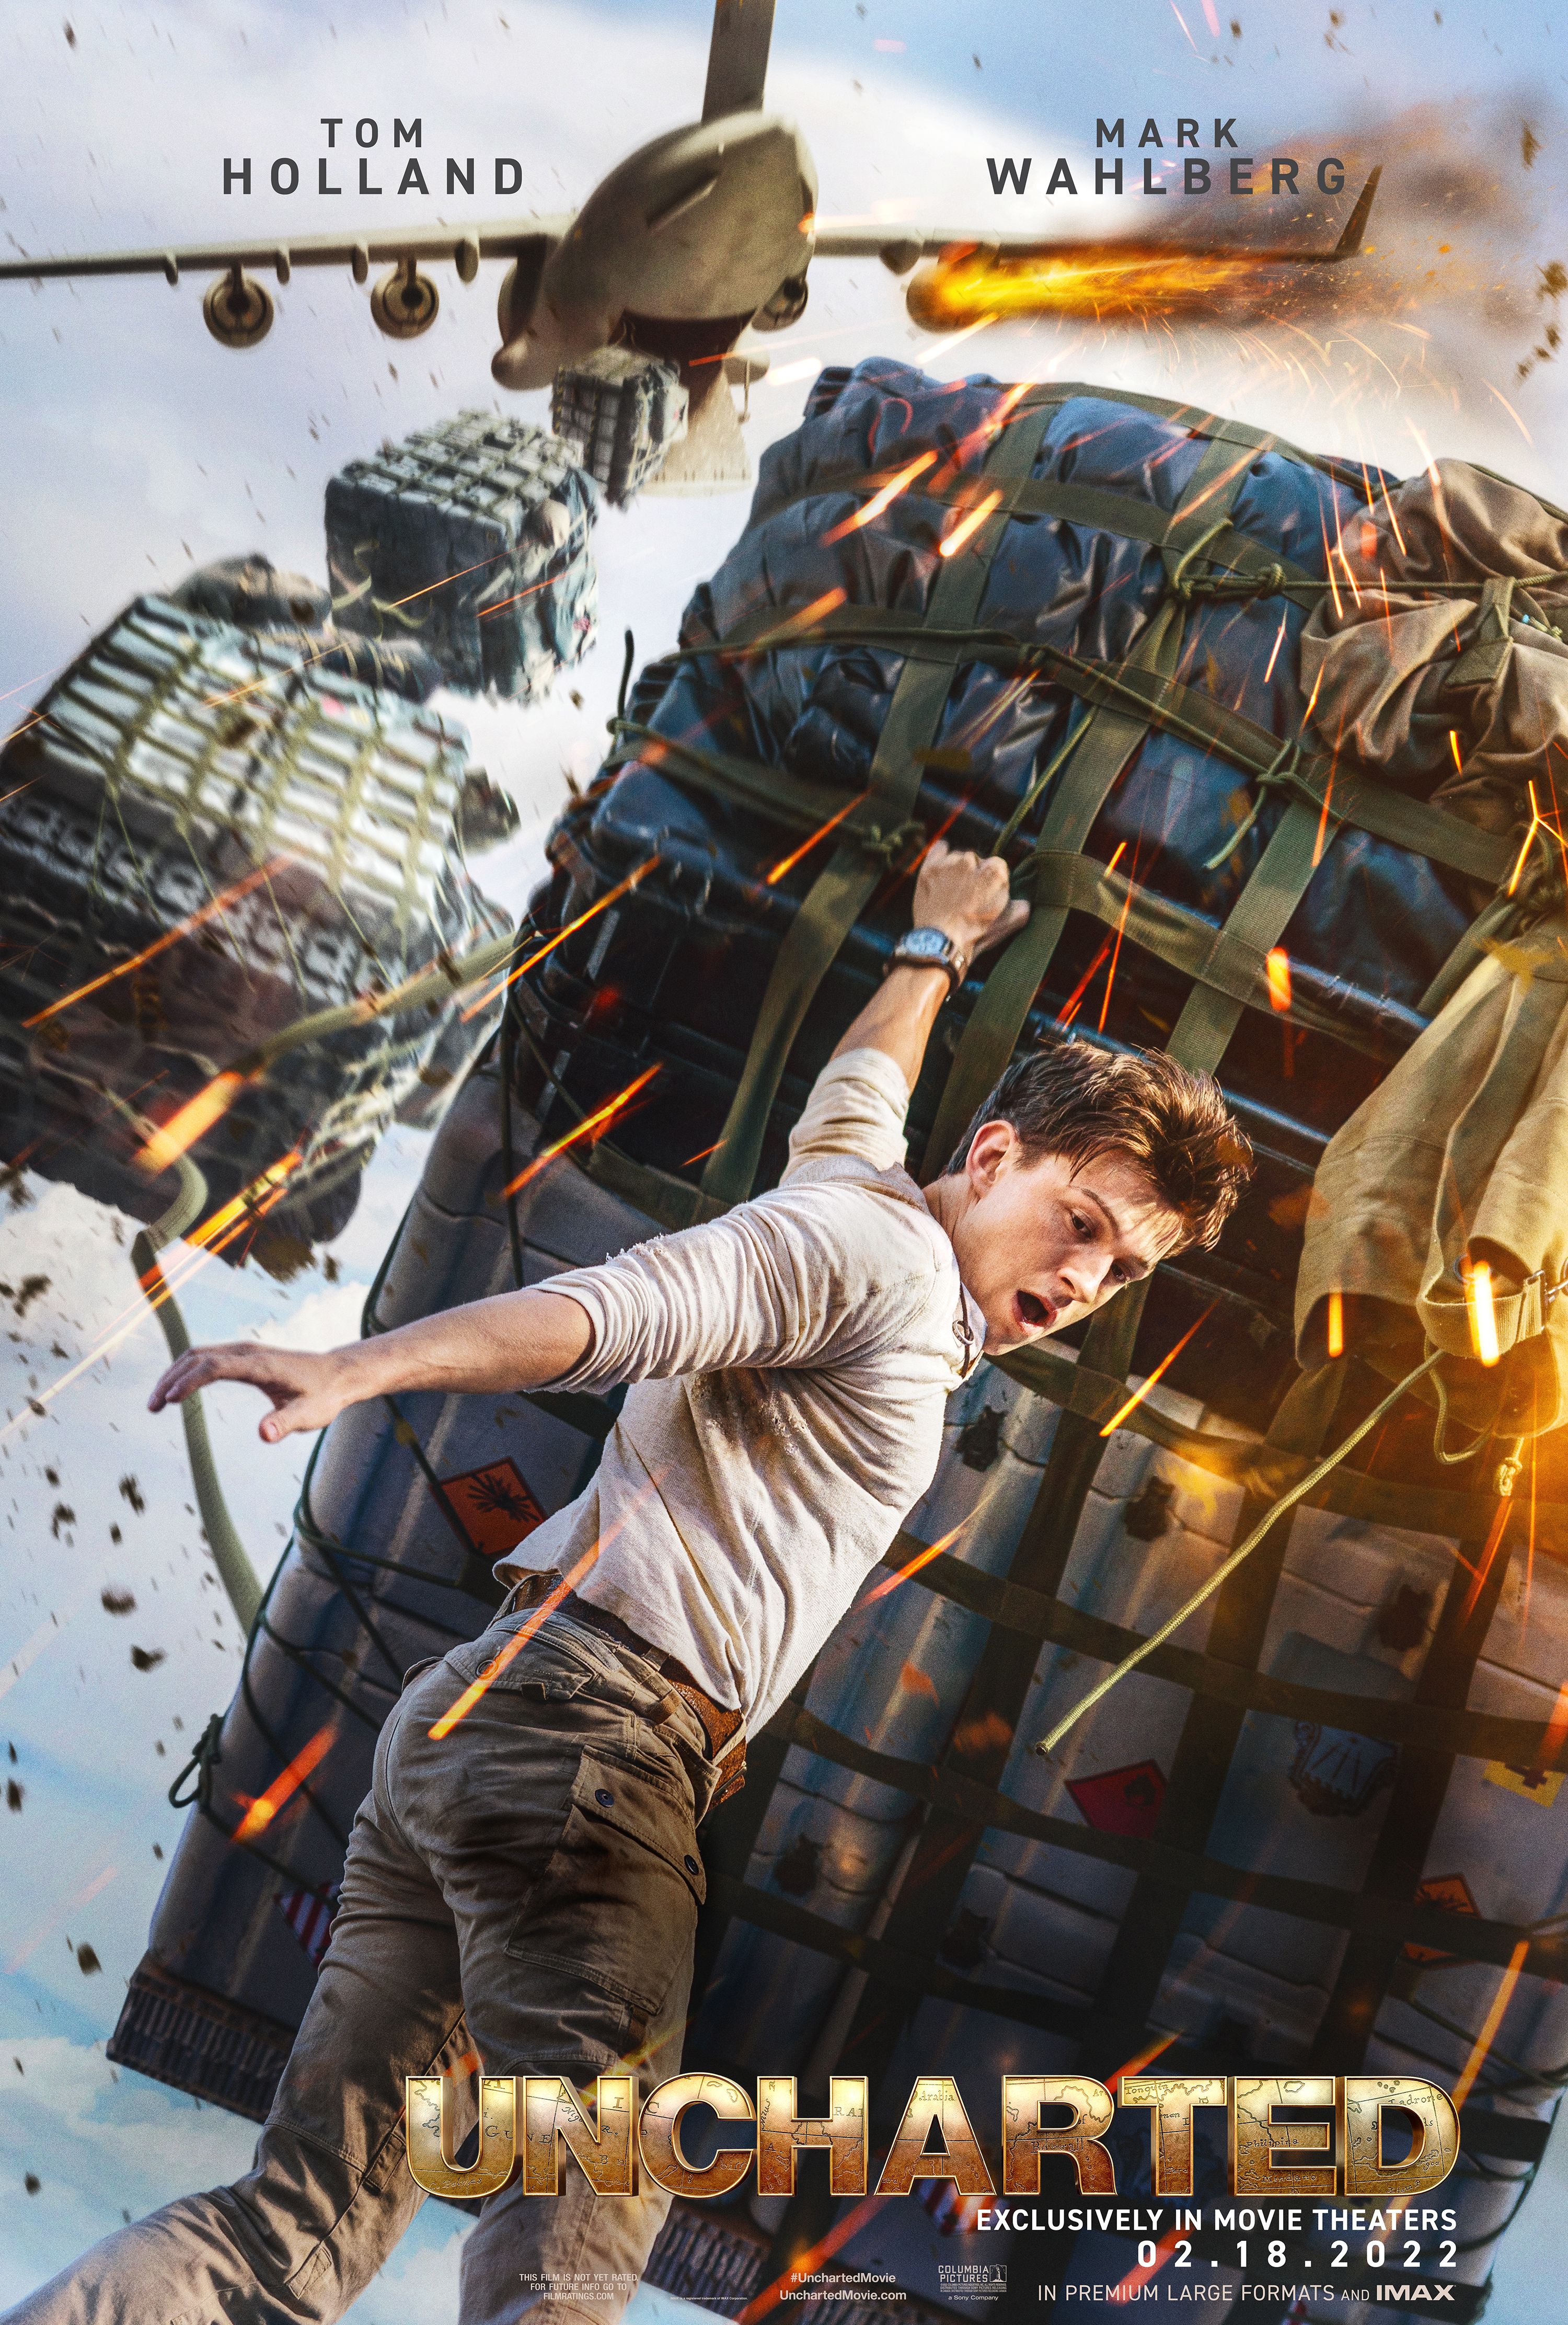 Uncharted Poster Shows Just How Dangerous Nathan Drake’s Plane Stunt Is